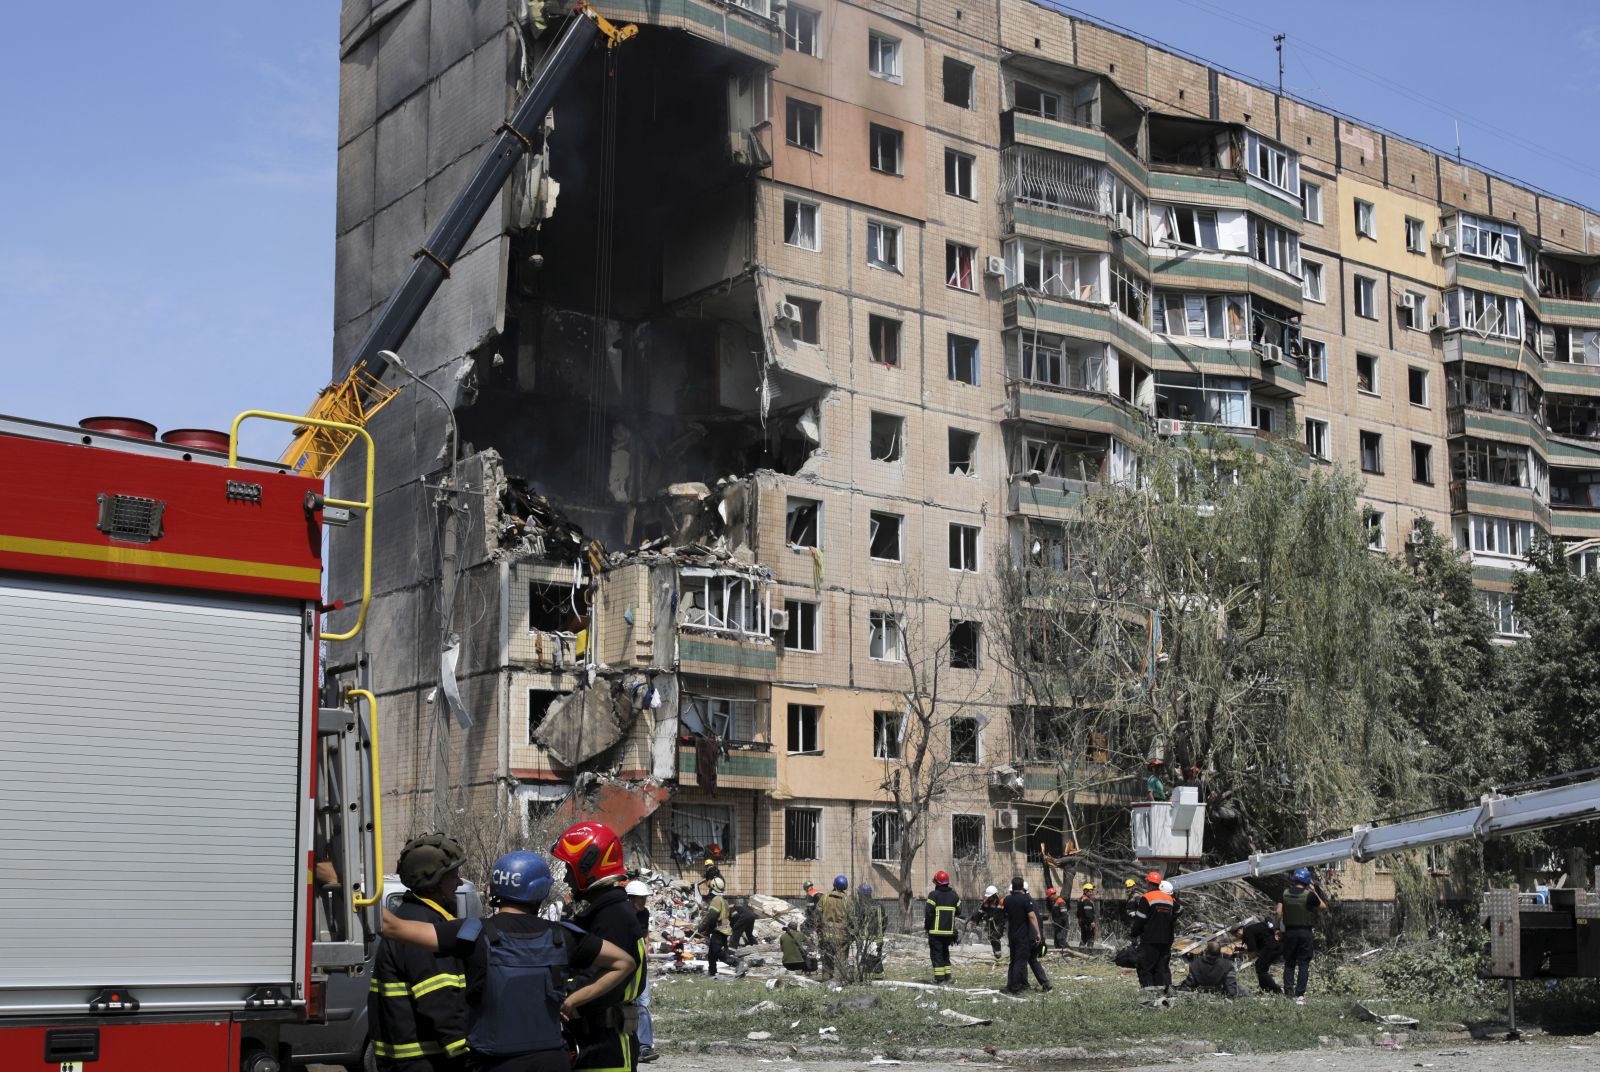 epa10778513 Ukrainian rescuers work at the site of a damaged residential building after shelling in the city of Kryvyi Rih, central Ukraine, 31 July 2023, amid the Russian invasion. At least four people died and 43 others were injured as a result of a Russian missile attack on the city of Kryvyi Rih on 31 July, the State Emergency Service reported. Among the victims there is a 10-year-old child, the head of the Dnipropetrovsk Regional Military Administration, Sergey Lysak wrote on telegram, adding that a search operation at the site was ongoing. Russian troops entered Ukrainian territory in February 2022, starting a conflict that has provoked destruction and a humanitarian crisis.  EPA/ARSEN DZODZAIEV